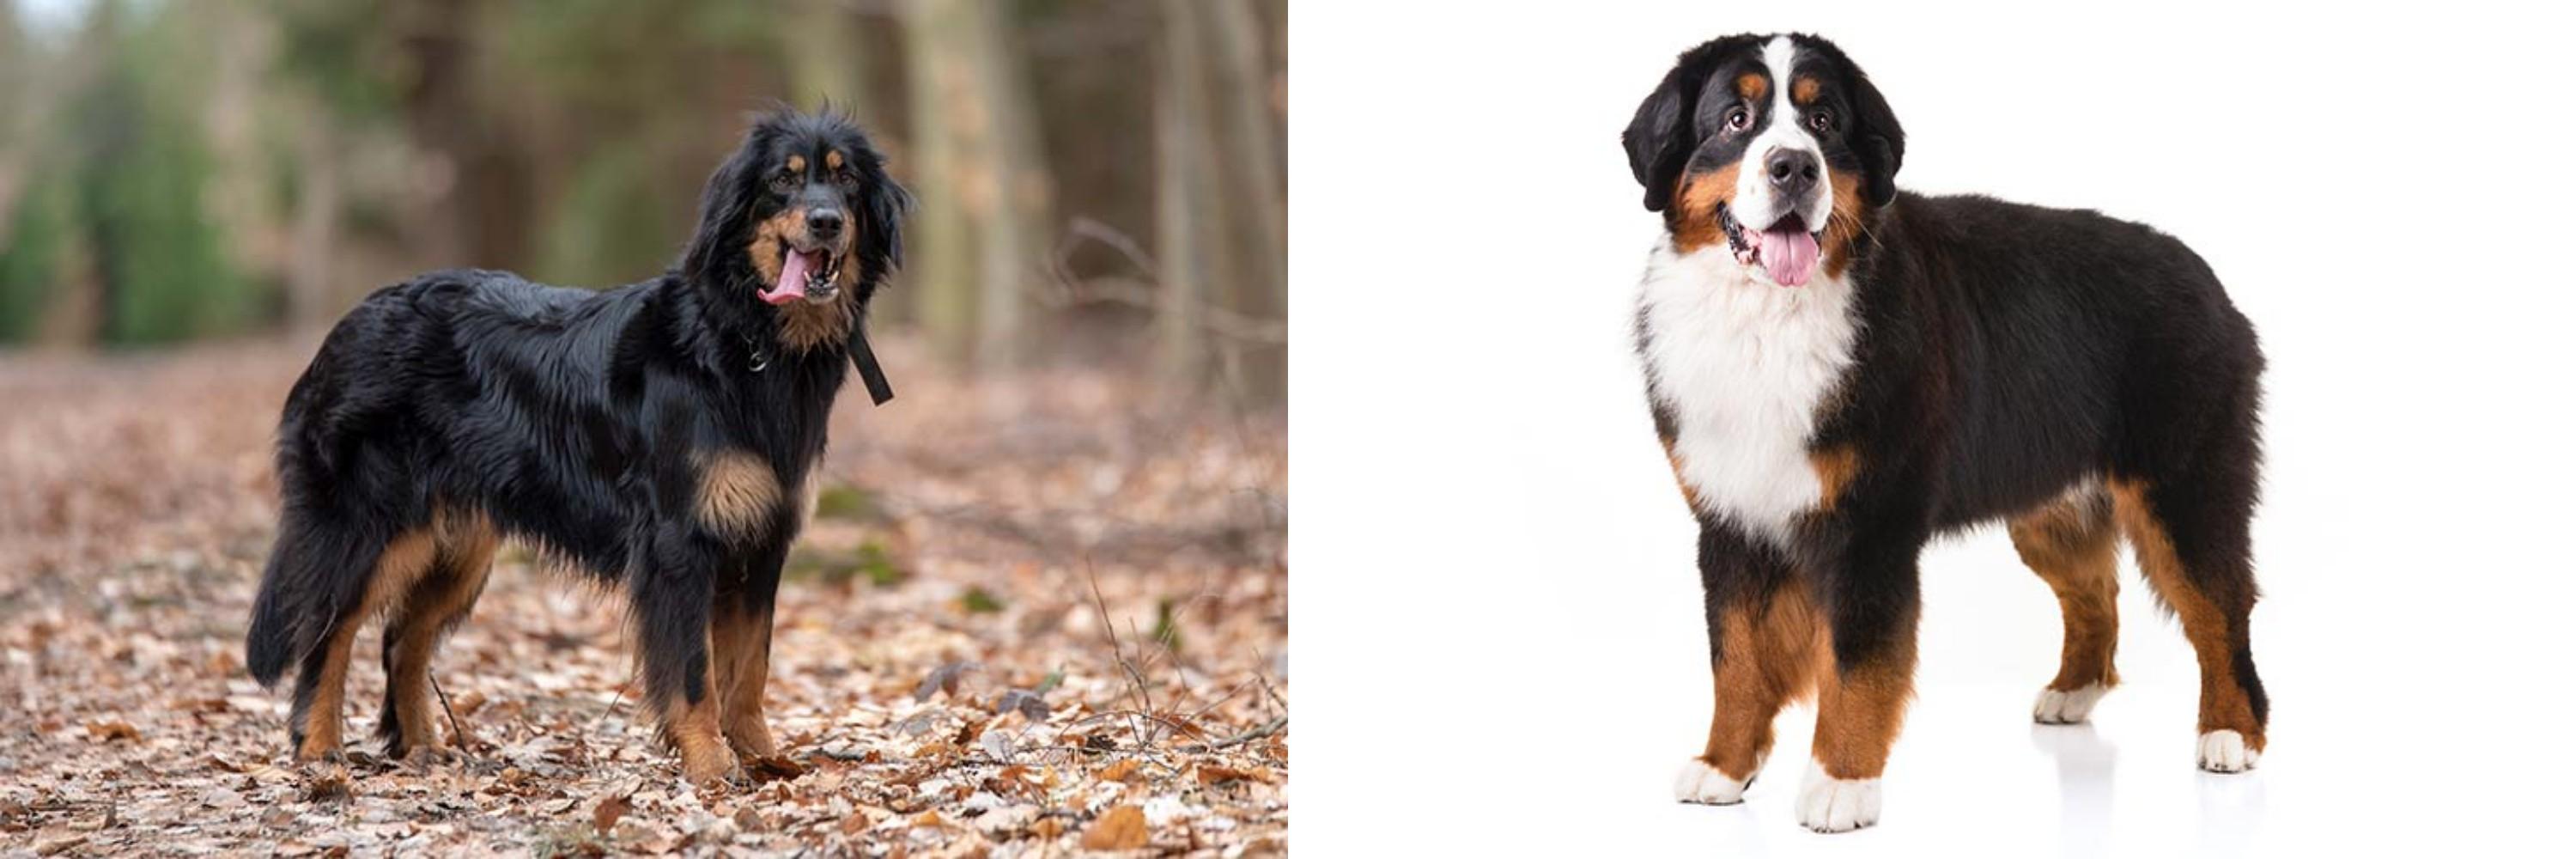 Hovawart Vs Bernese Mountain Dog Breed Comparison